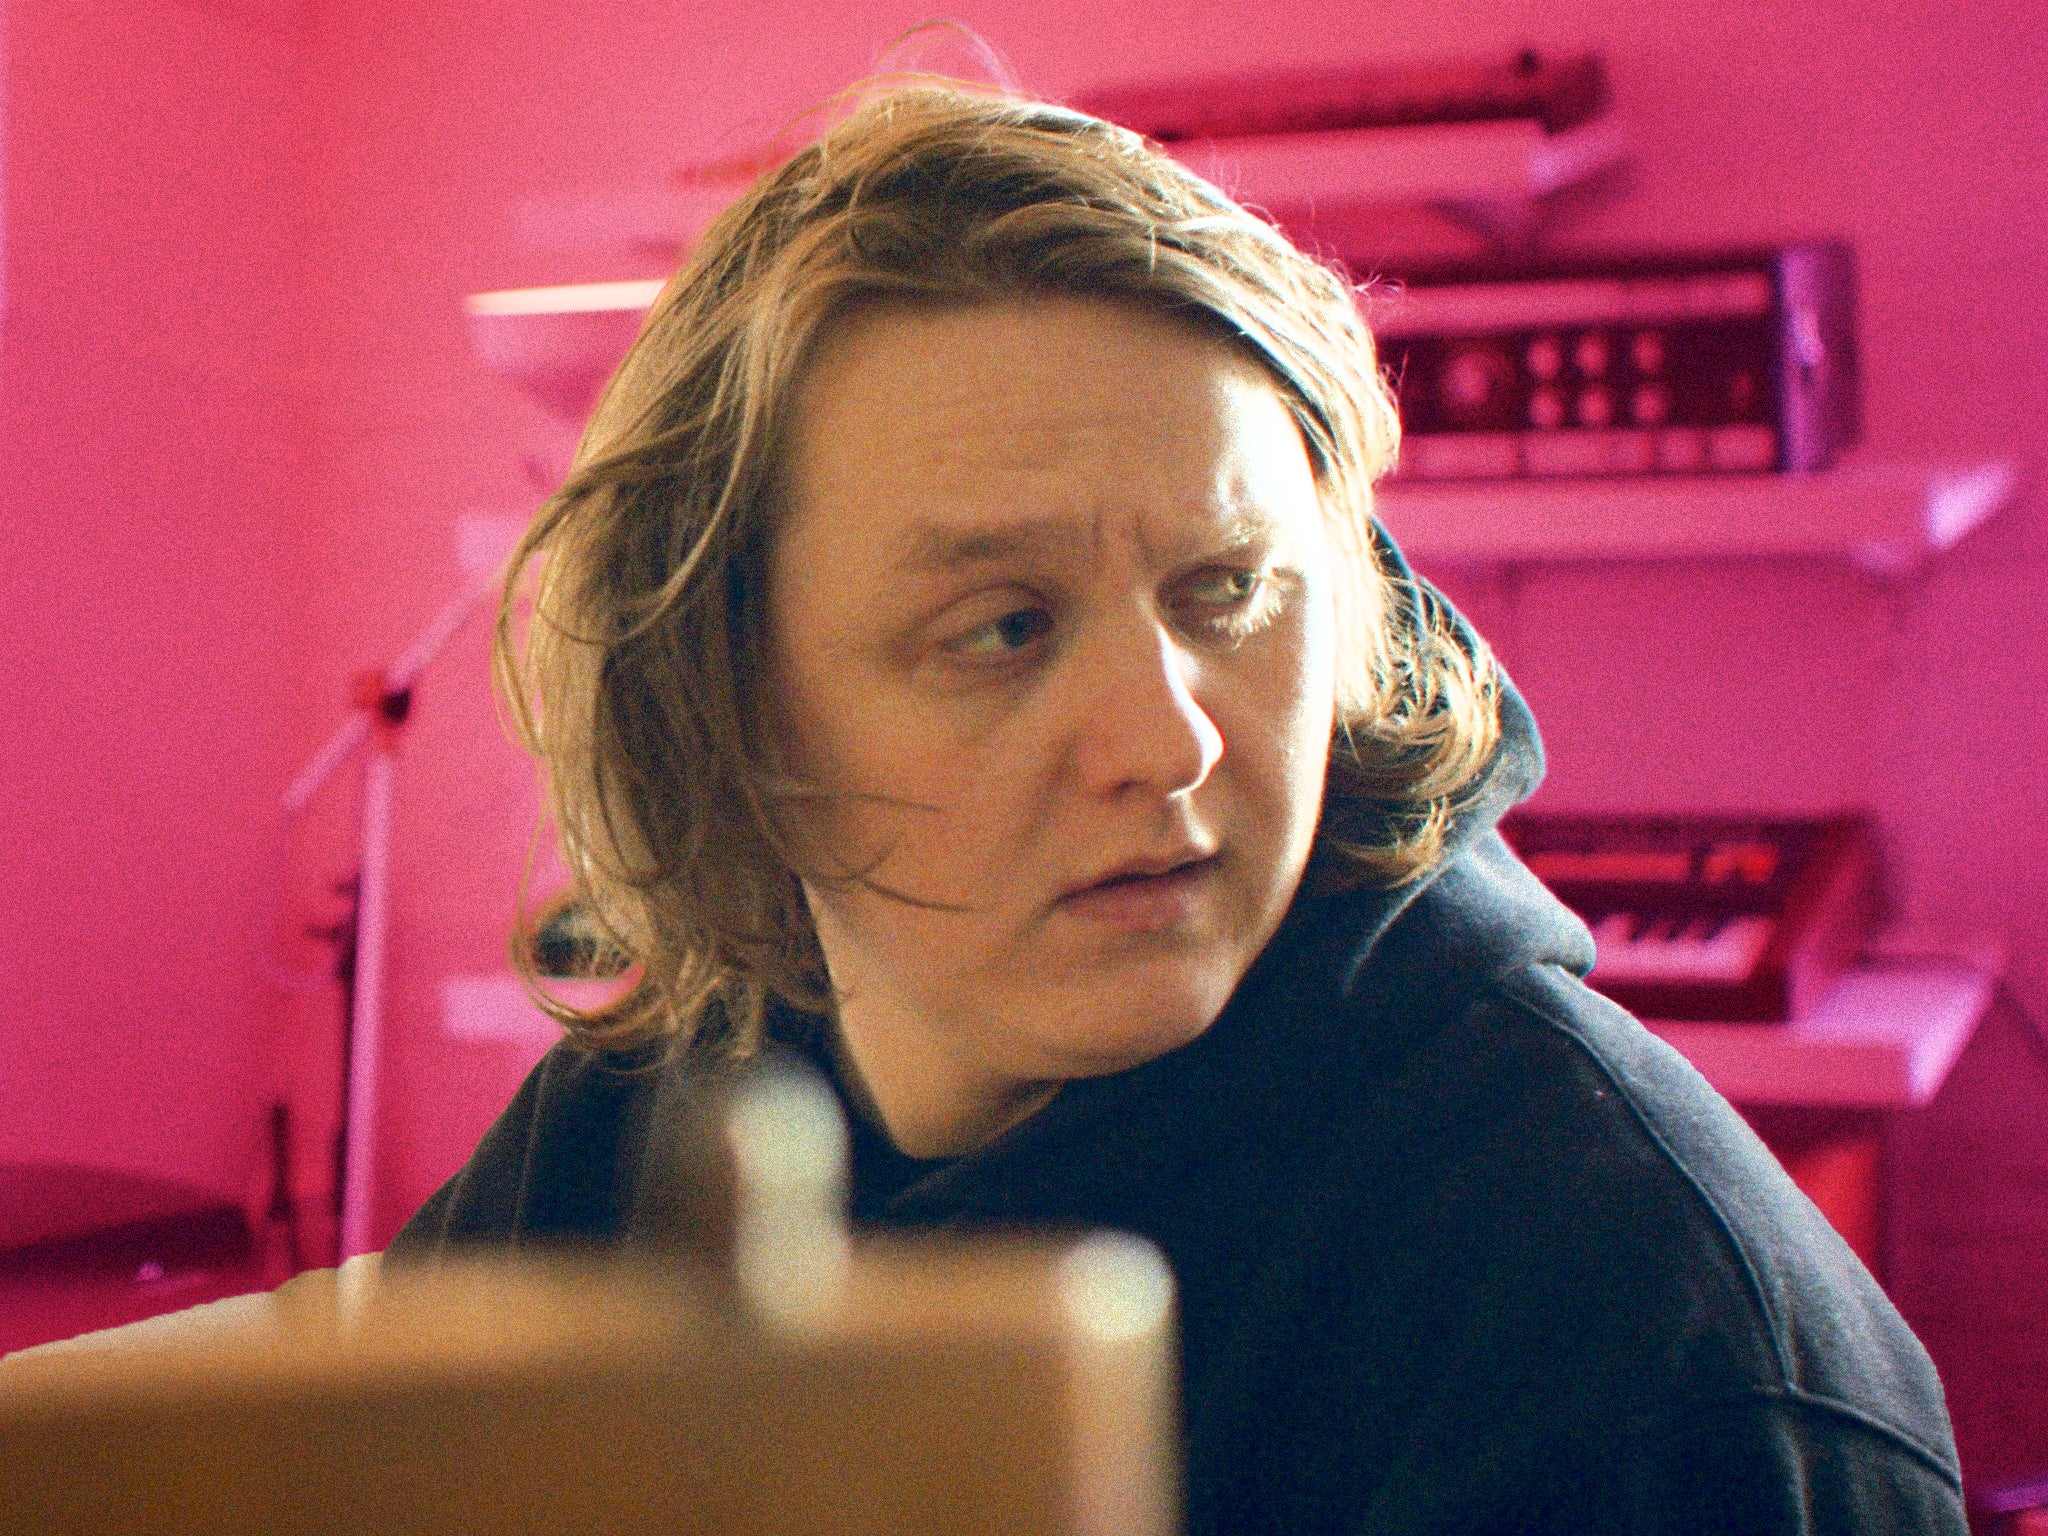 ‘I twitch every day of my f***ing life’: Lewis Capaldi in his Netflix documentary ‘How I’m Feeling Now’